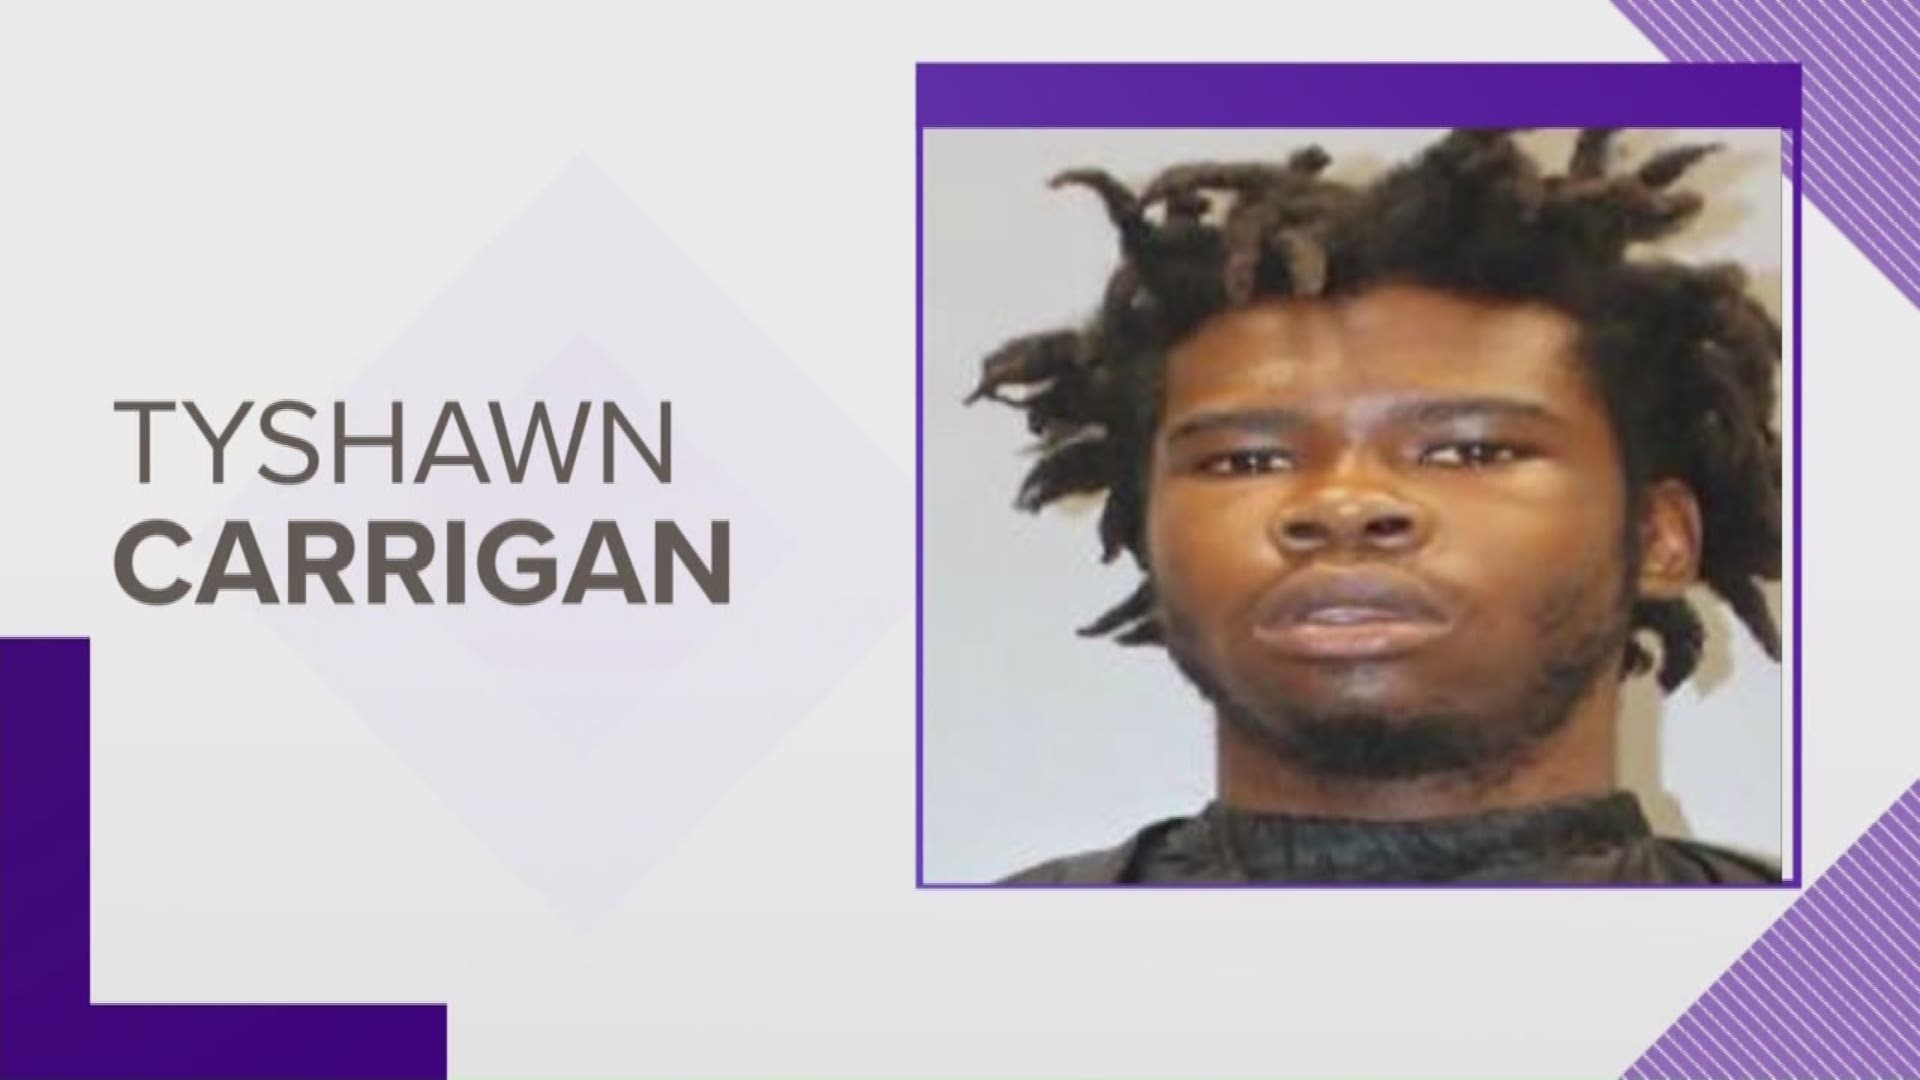 Tyshawn Carrigan is wanted in connection to the death of 19-year-old Jayguan Hughes, who was shot on the 1800 block of Crestview Avenue on November 26.